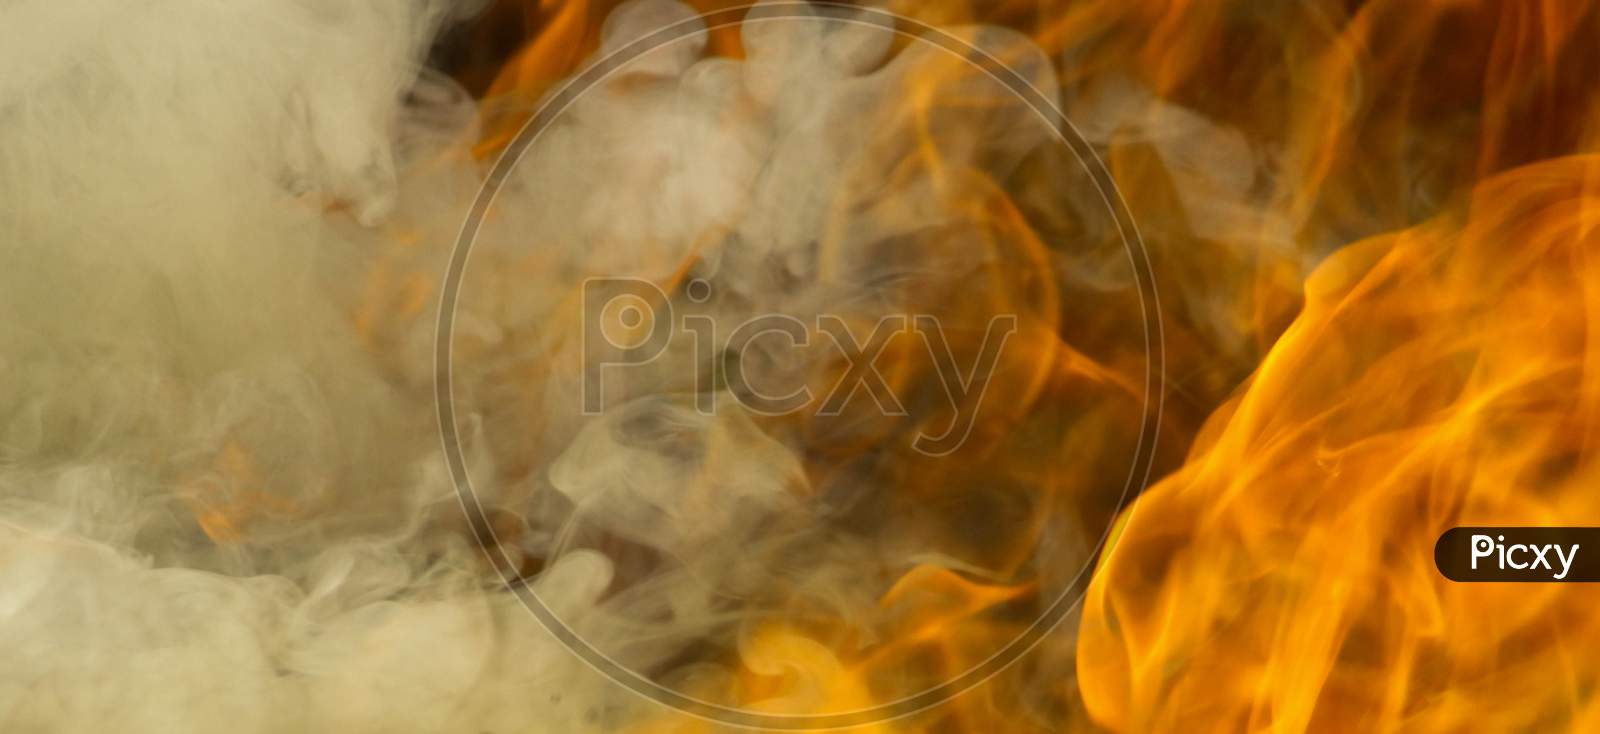 fire effect background